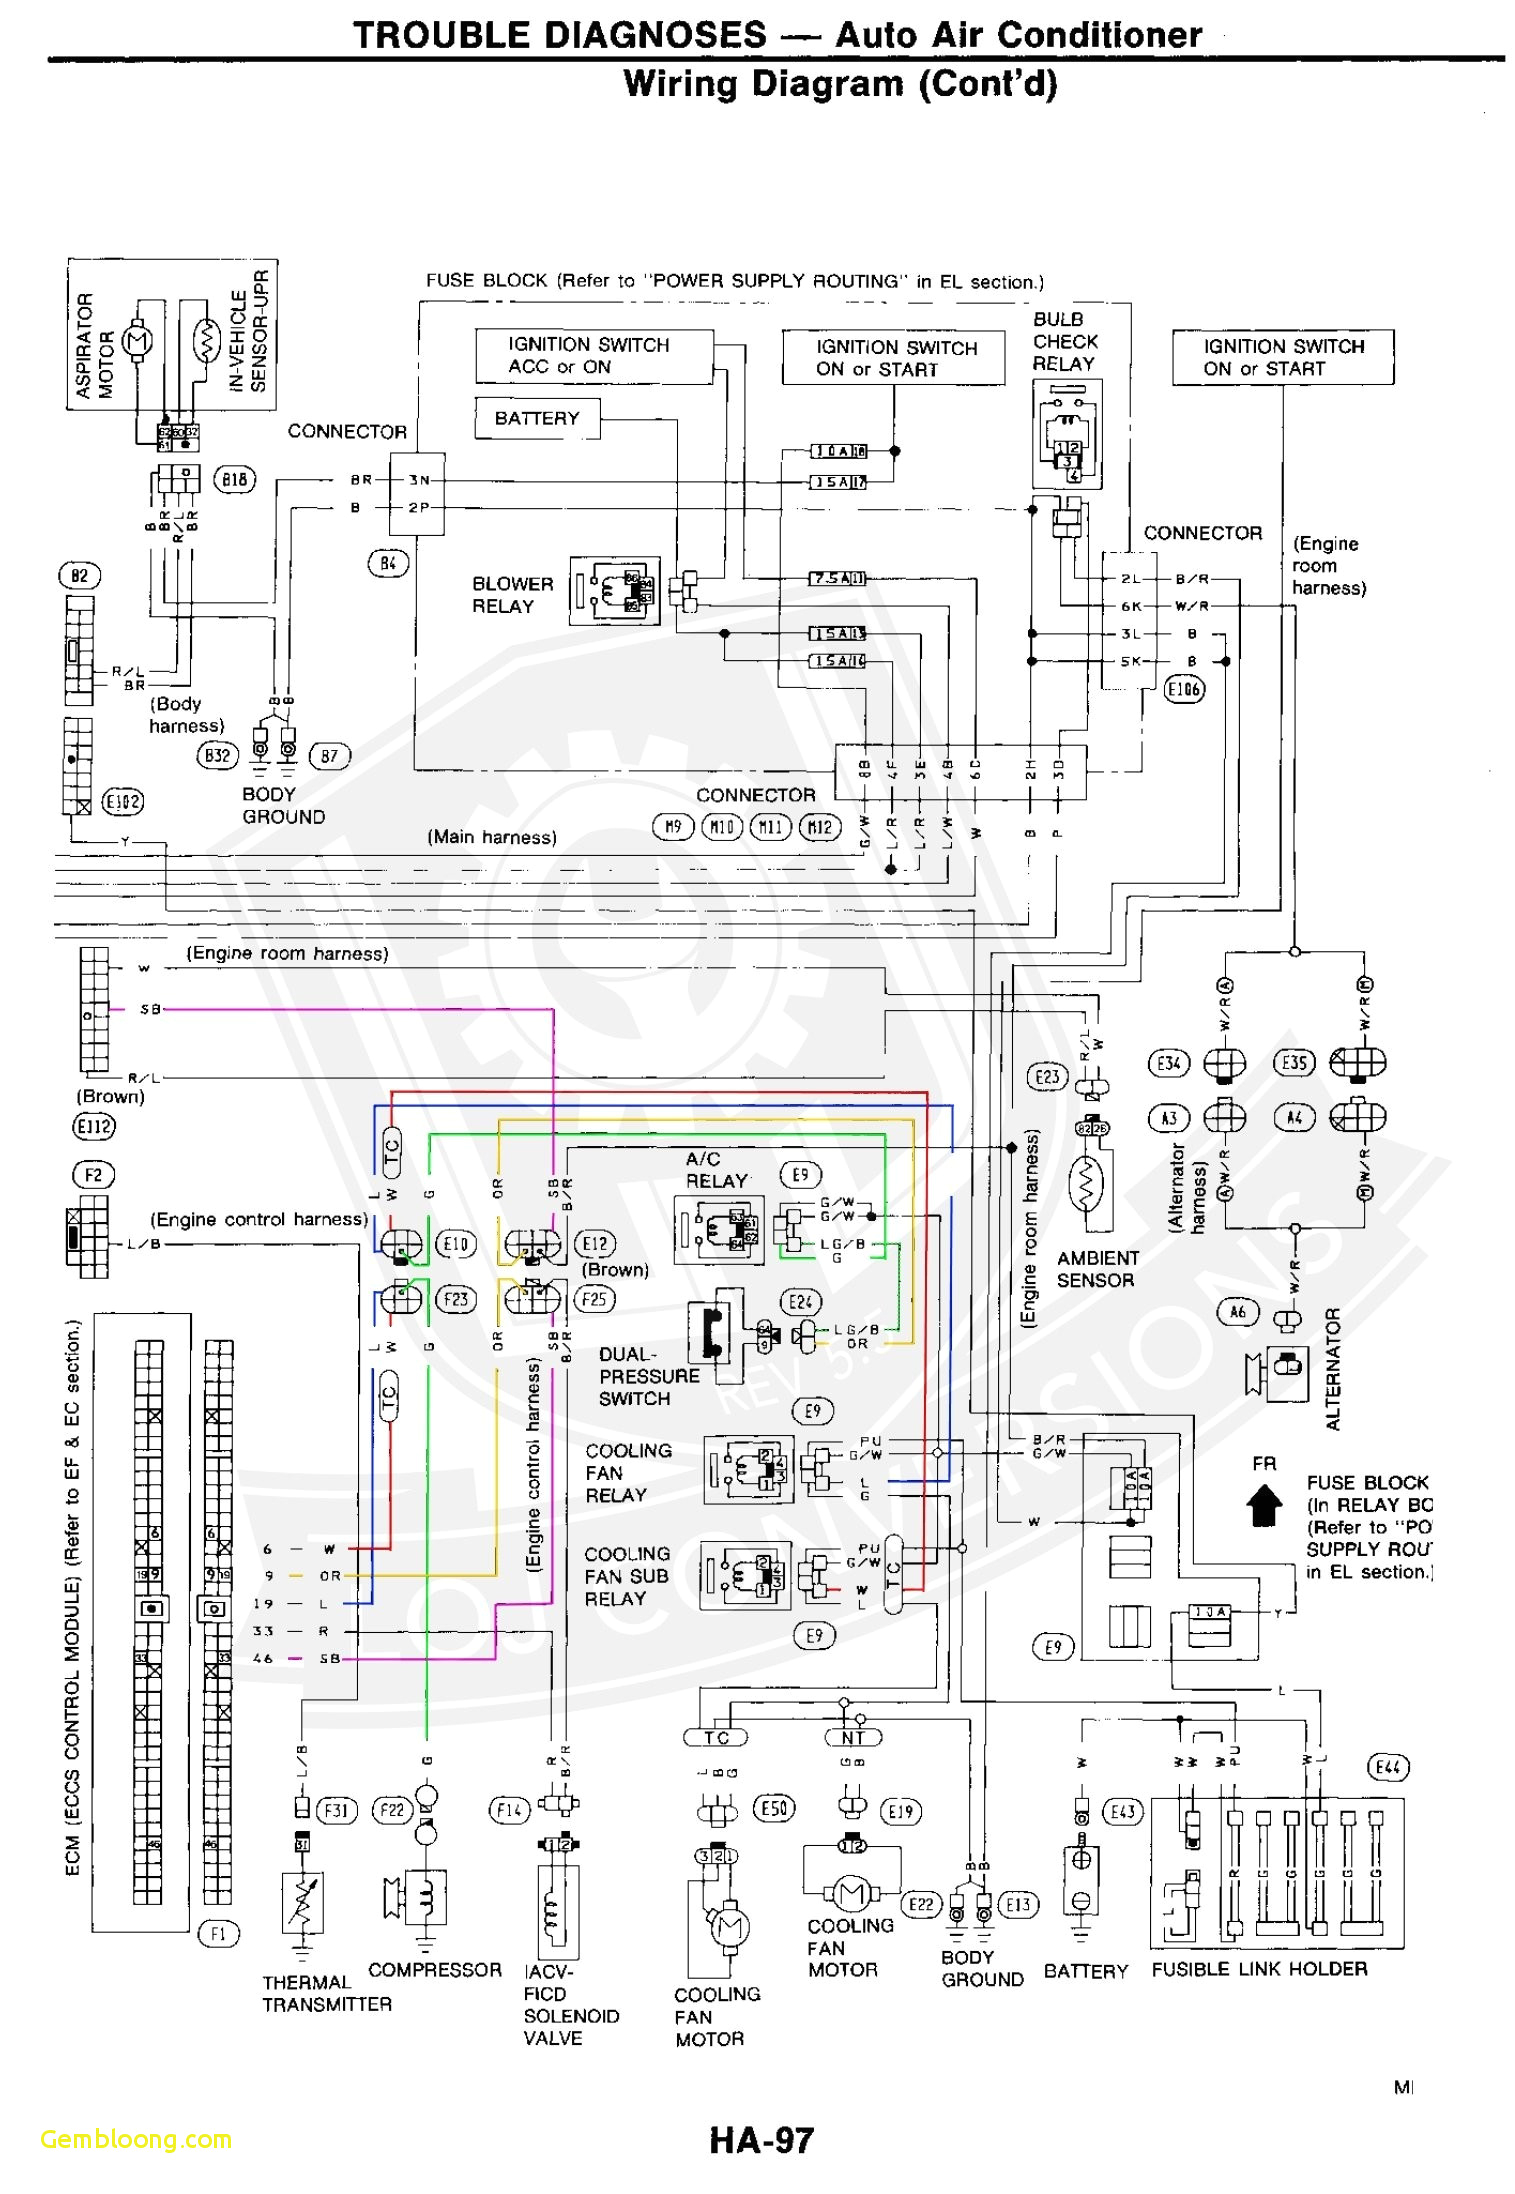 download bmw e36 dme wiring diagram bmw e30 m3 wiring diagram also bmw engine cooling system diagram of bmw e36 dme wiring diagram jpg